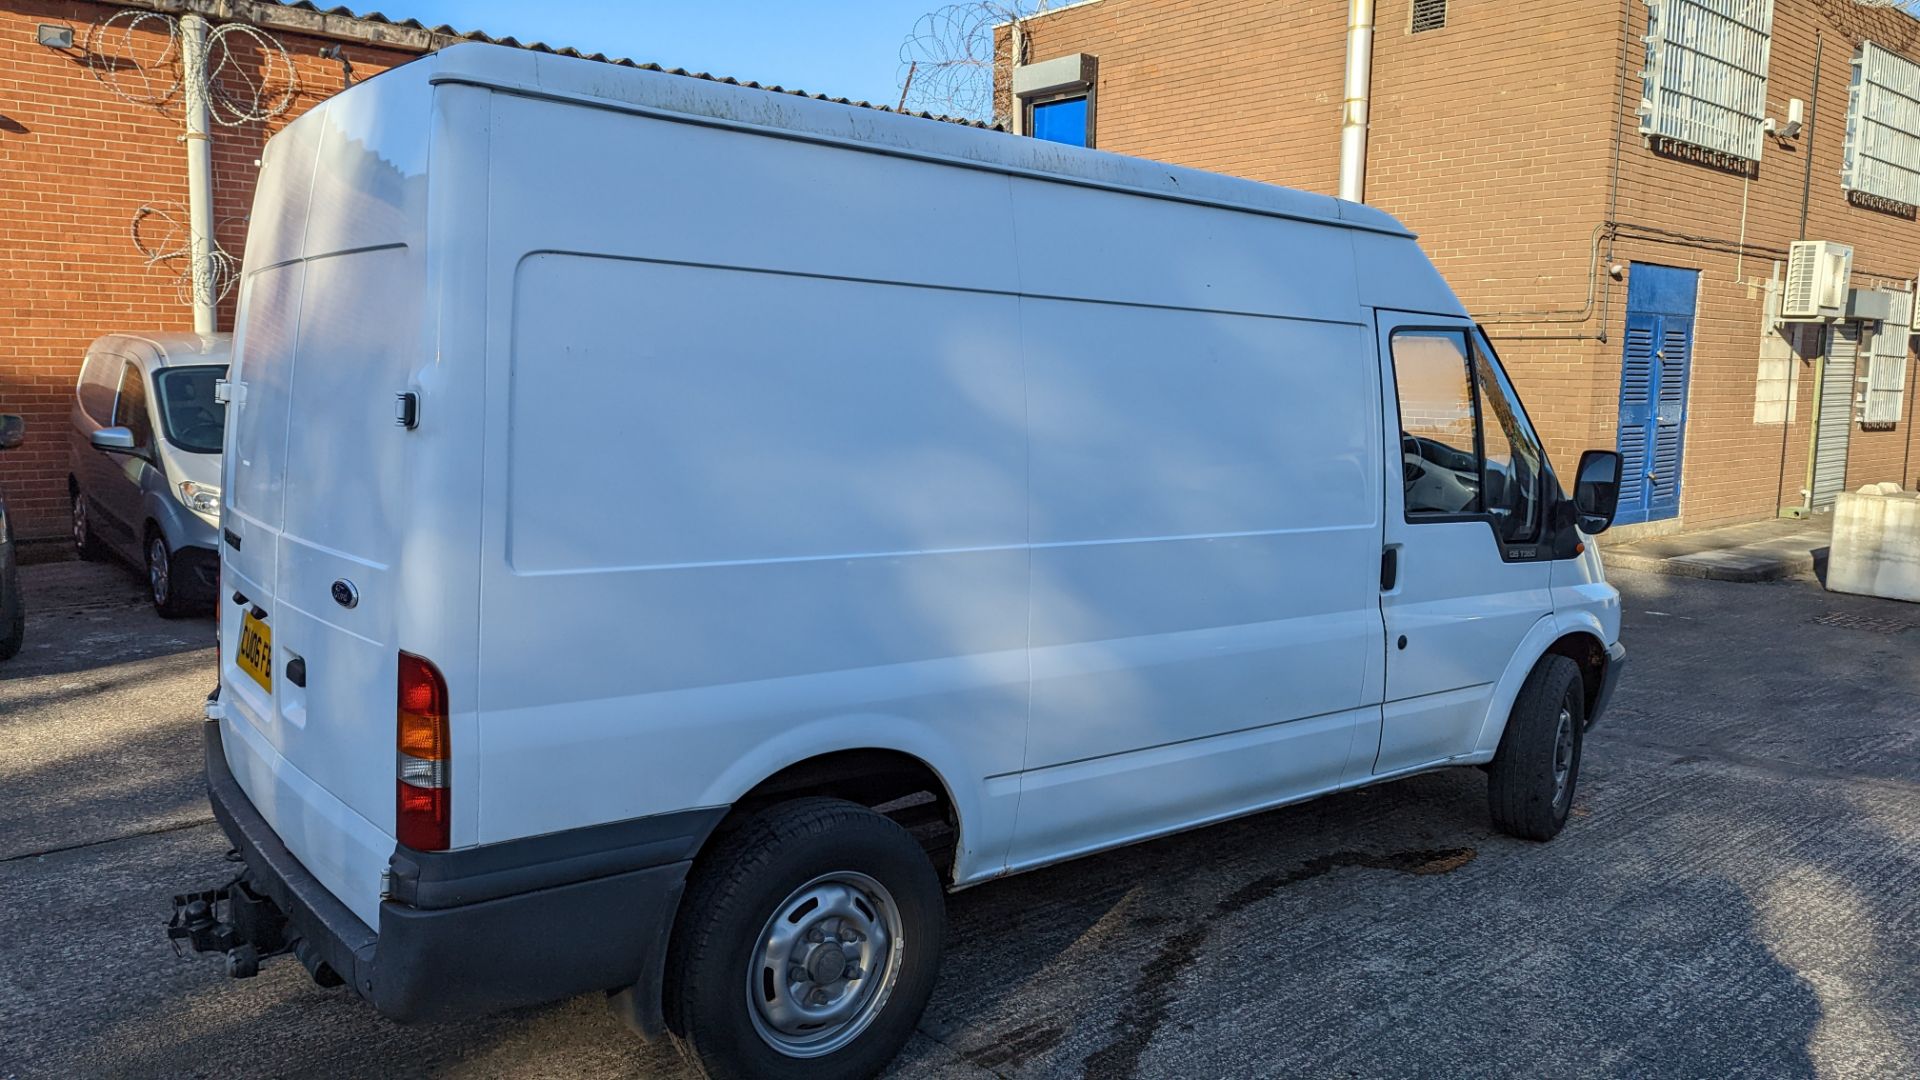 CU06 FBC Ford Transit panel van, 6 speed manual gearbox, 2402cc diesel engine. Colour: white. Fir - Image 7 of 44